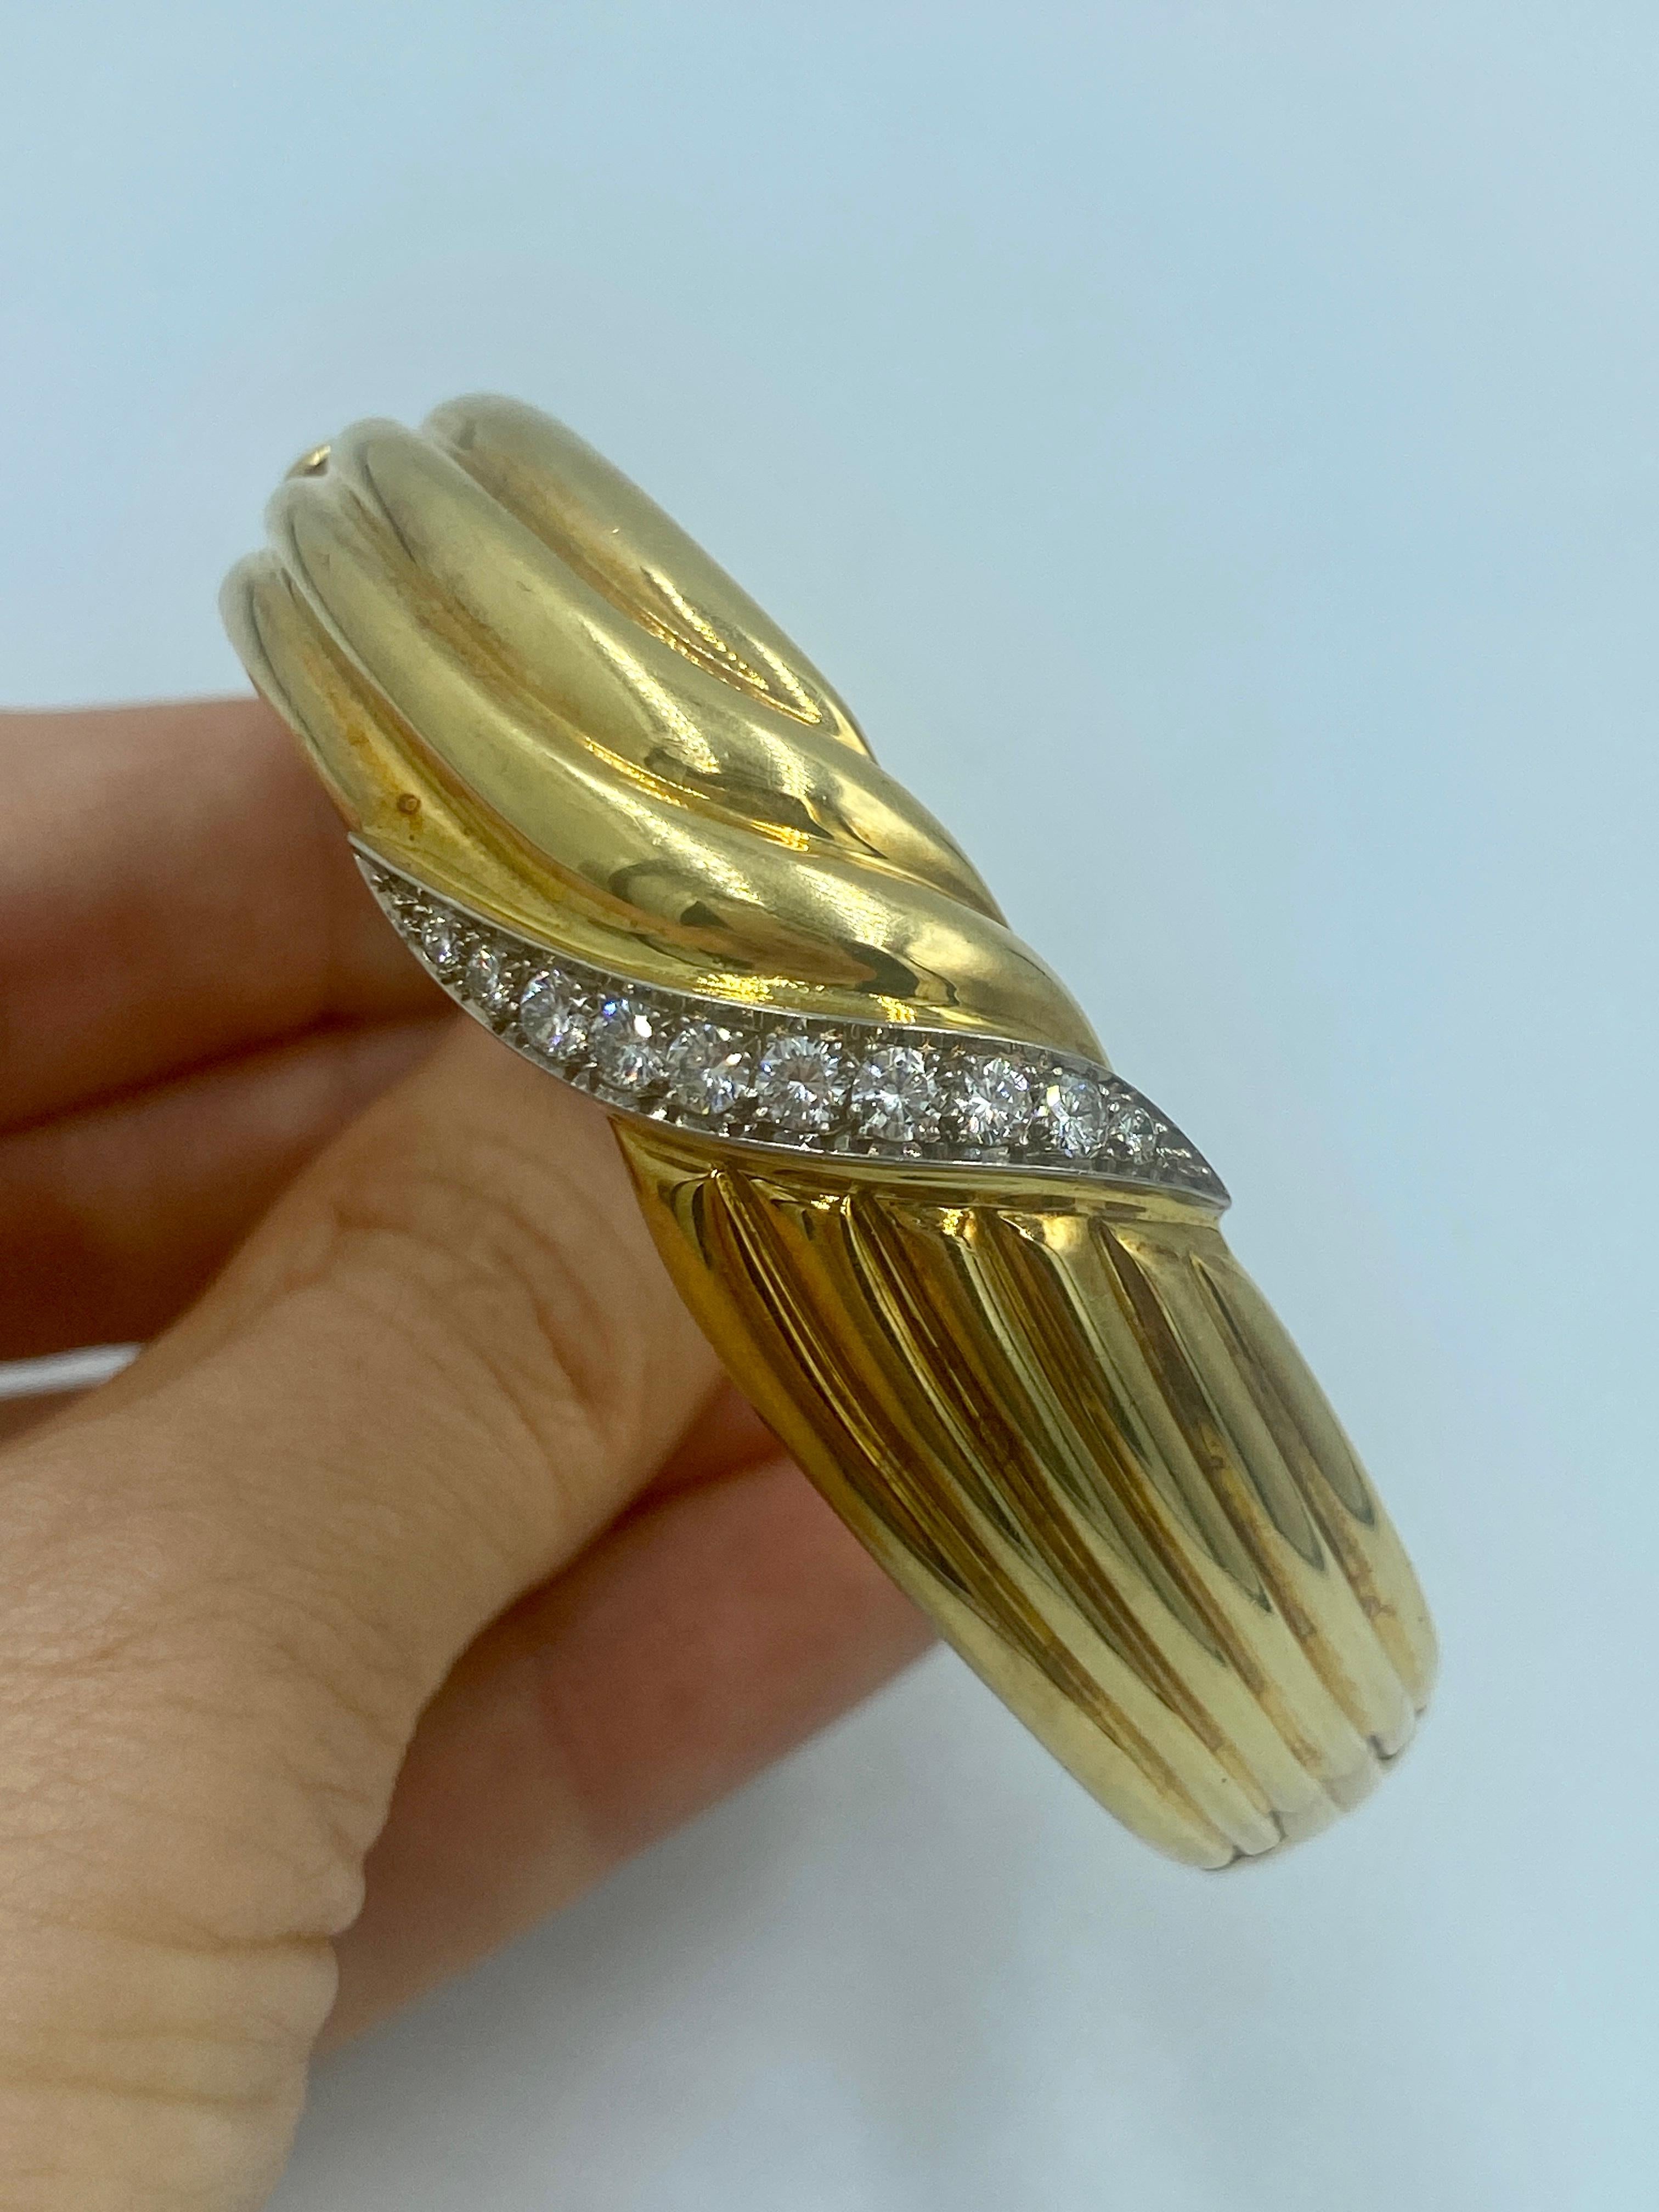 This elegant 1970s European made 18k gold bangle has a swirl design and is adorned with a swirl of approximately 1 carat of diamonds. The inner circumference of this bangle measures 18cm.